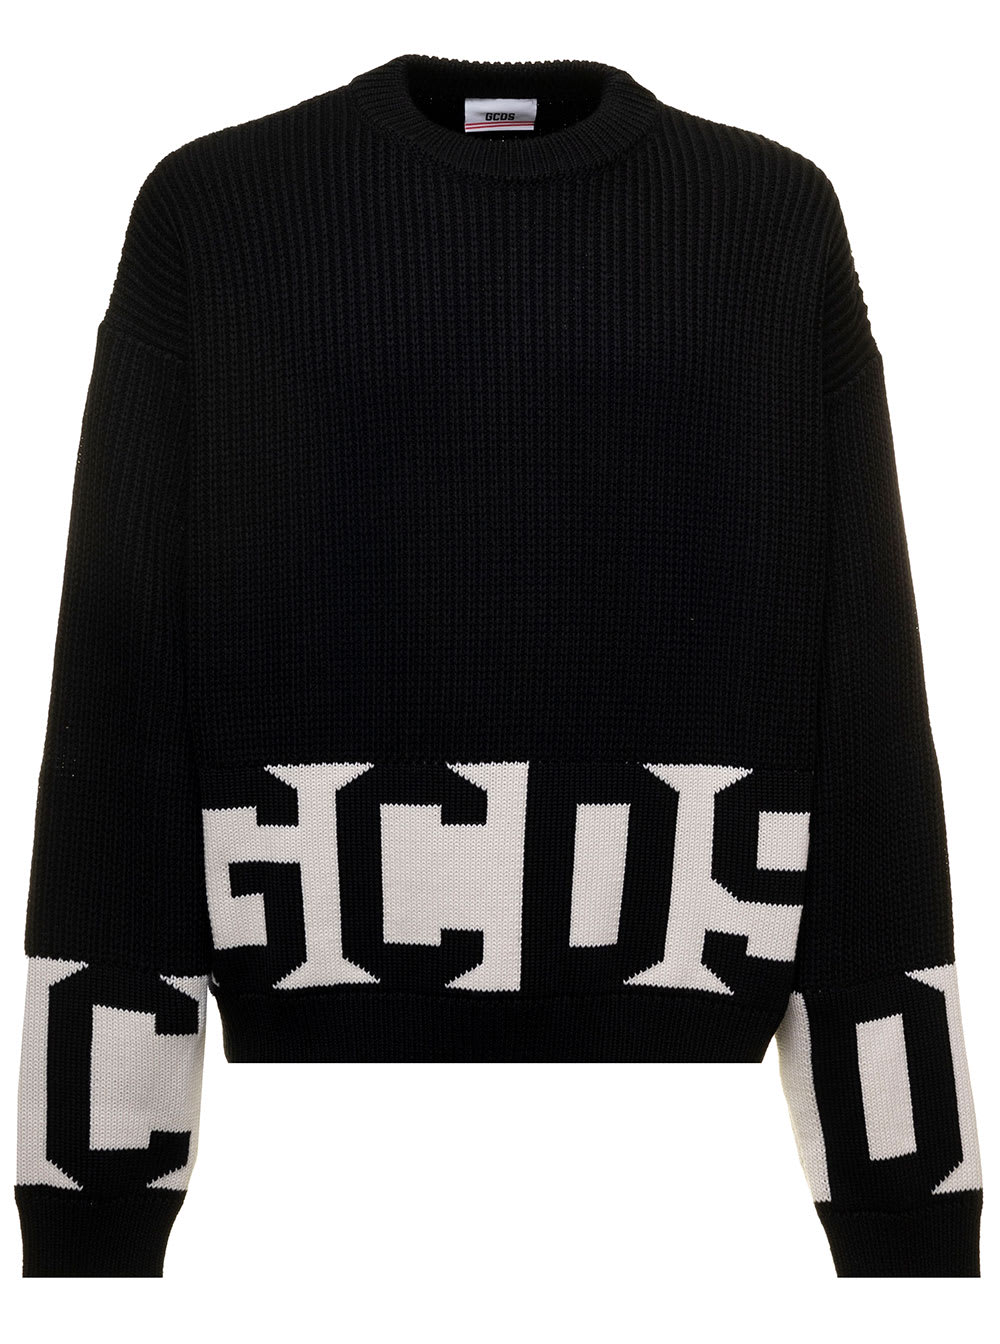 Black Sweater In Knit With Contrast Jacquard Logo To The Sleeves And Bottom Gcds Man Collar